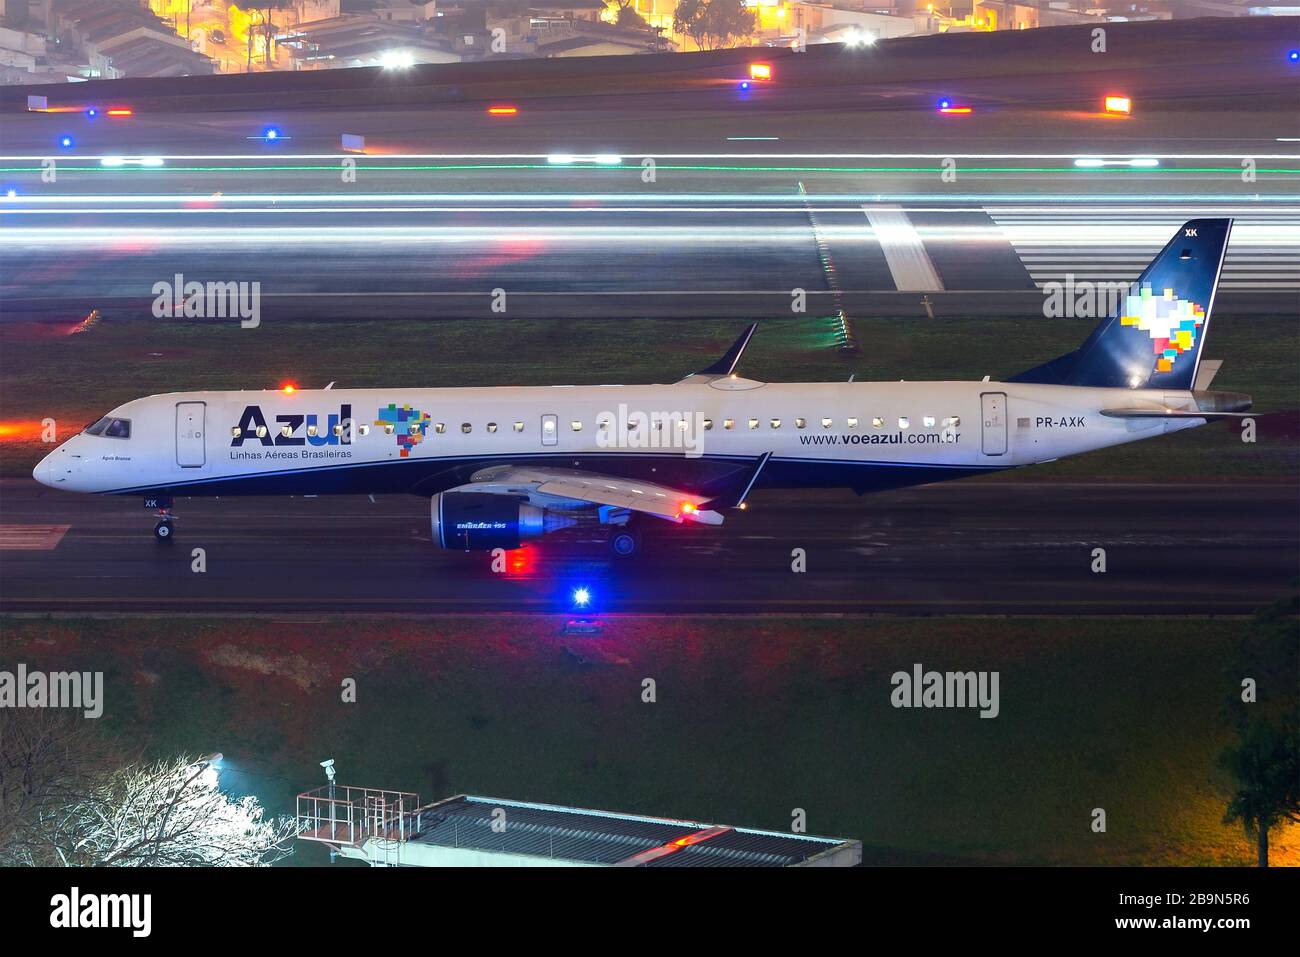 Azul Brazilian Airlines Embraer ERJ-195 registered as PR-AXK before departure at night in Congonhas Airport (CGH /SBSP) in Sao Paulo, Brazil. Stock Photo